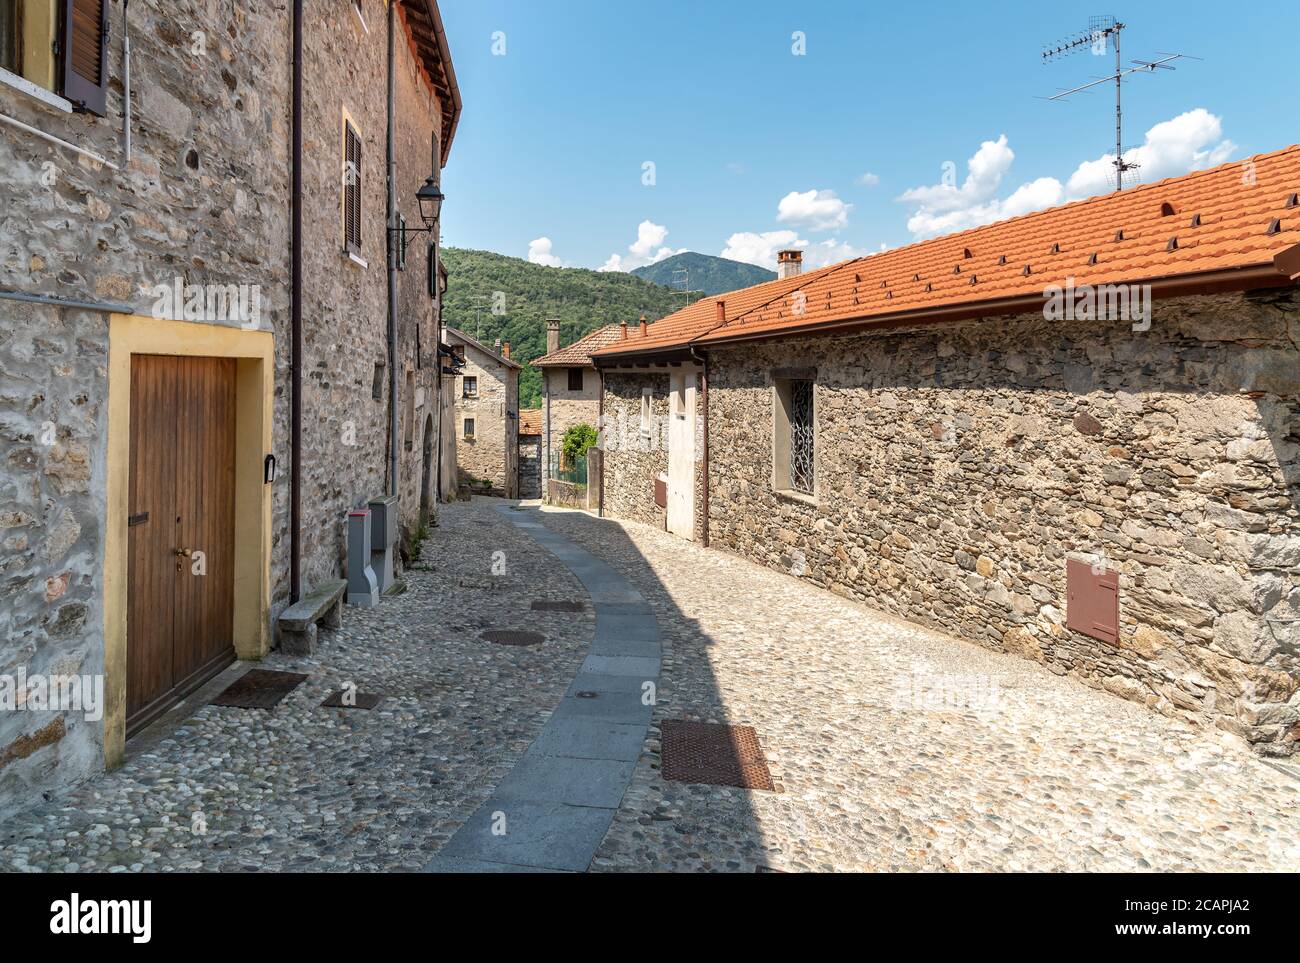 Narrow streets wit stone houses in the small mountain village of Bassola, hamlet of Armeno above Lake Orta in the province of Novara, Piedmont, Italy Stock Photo